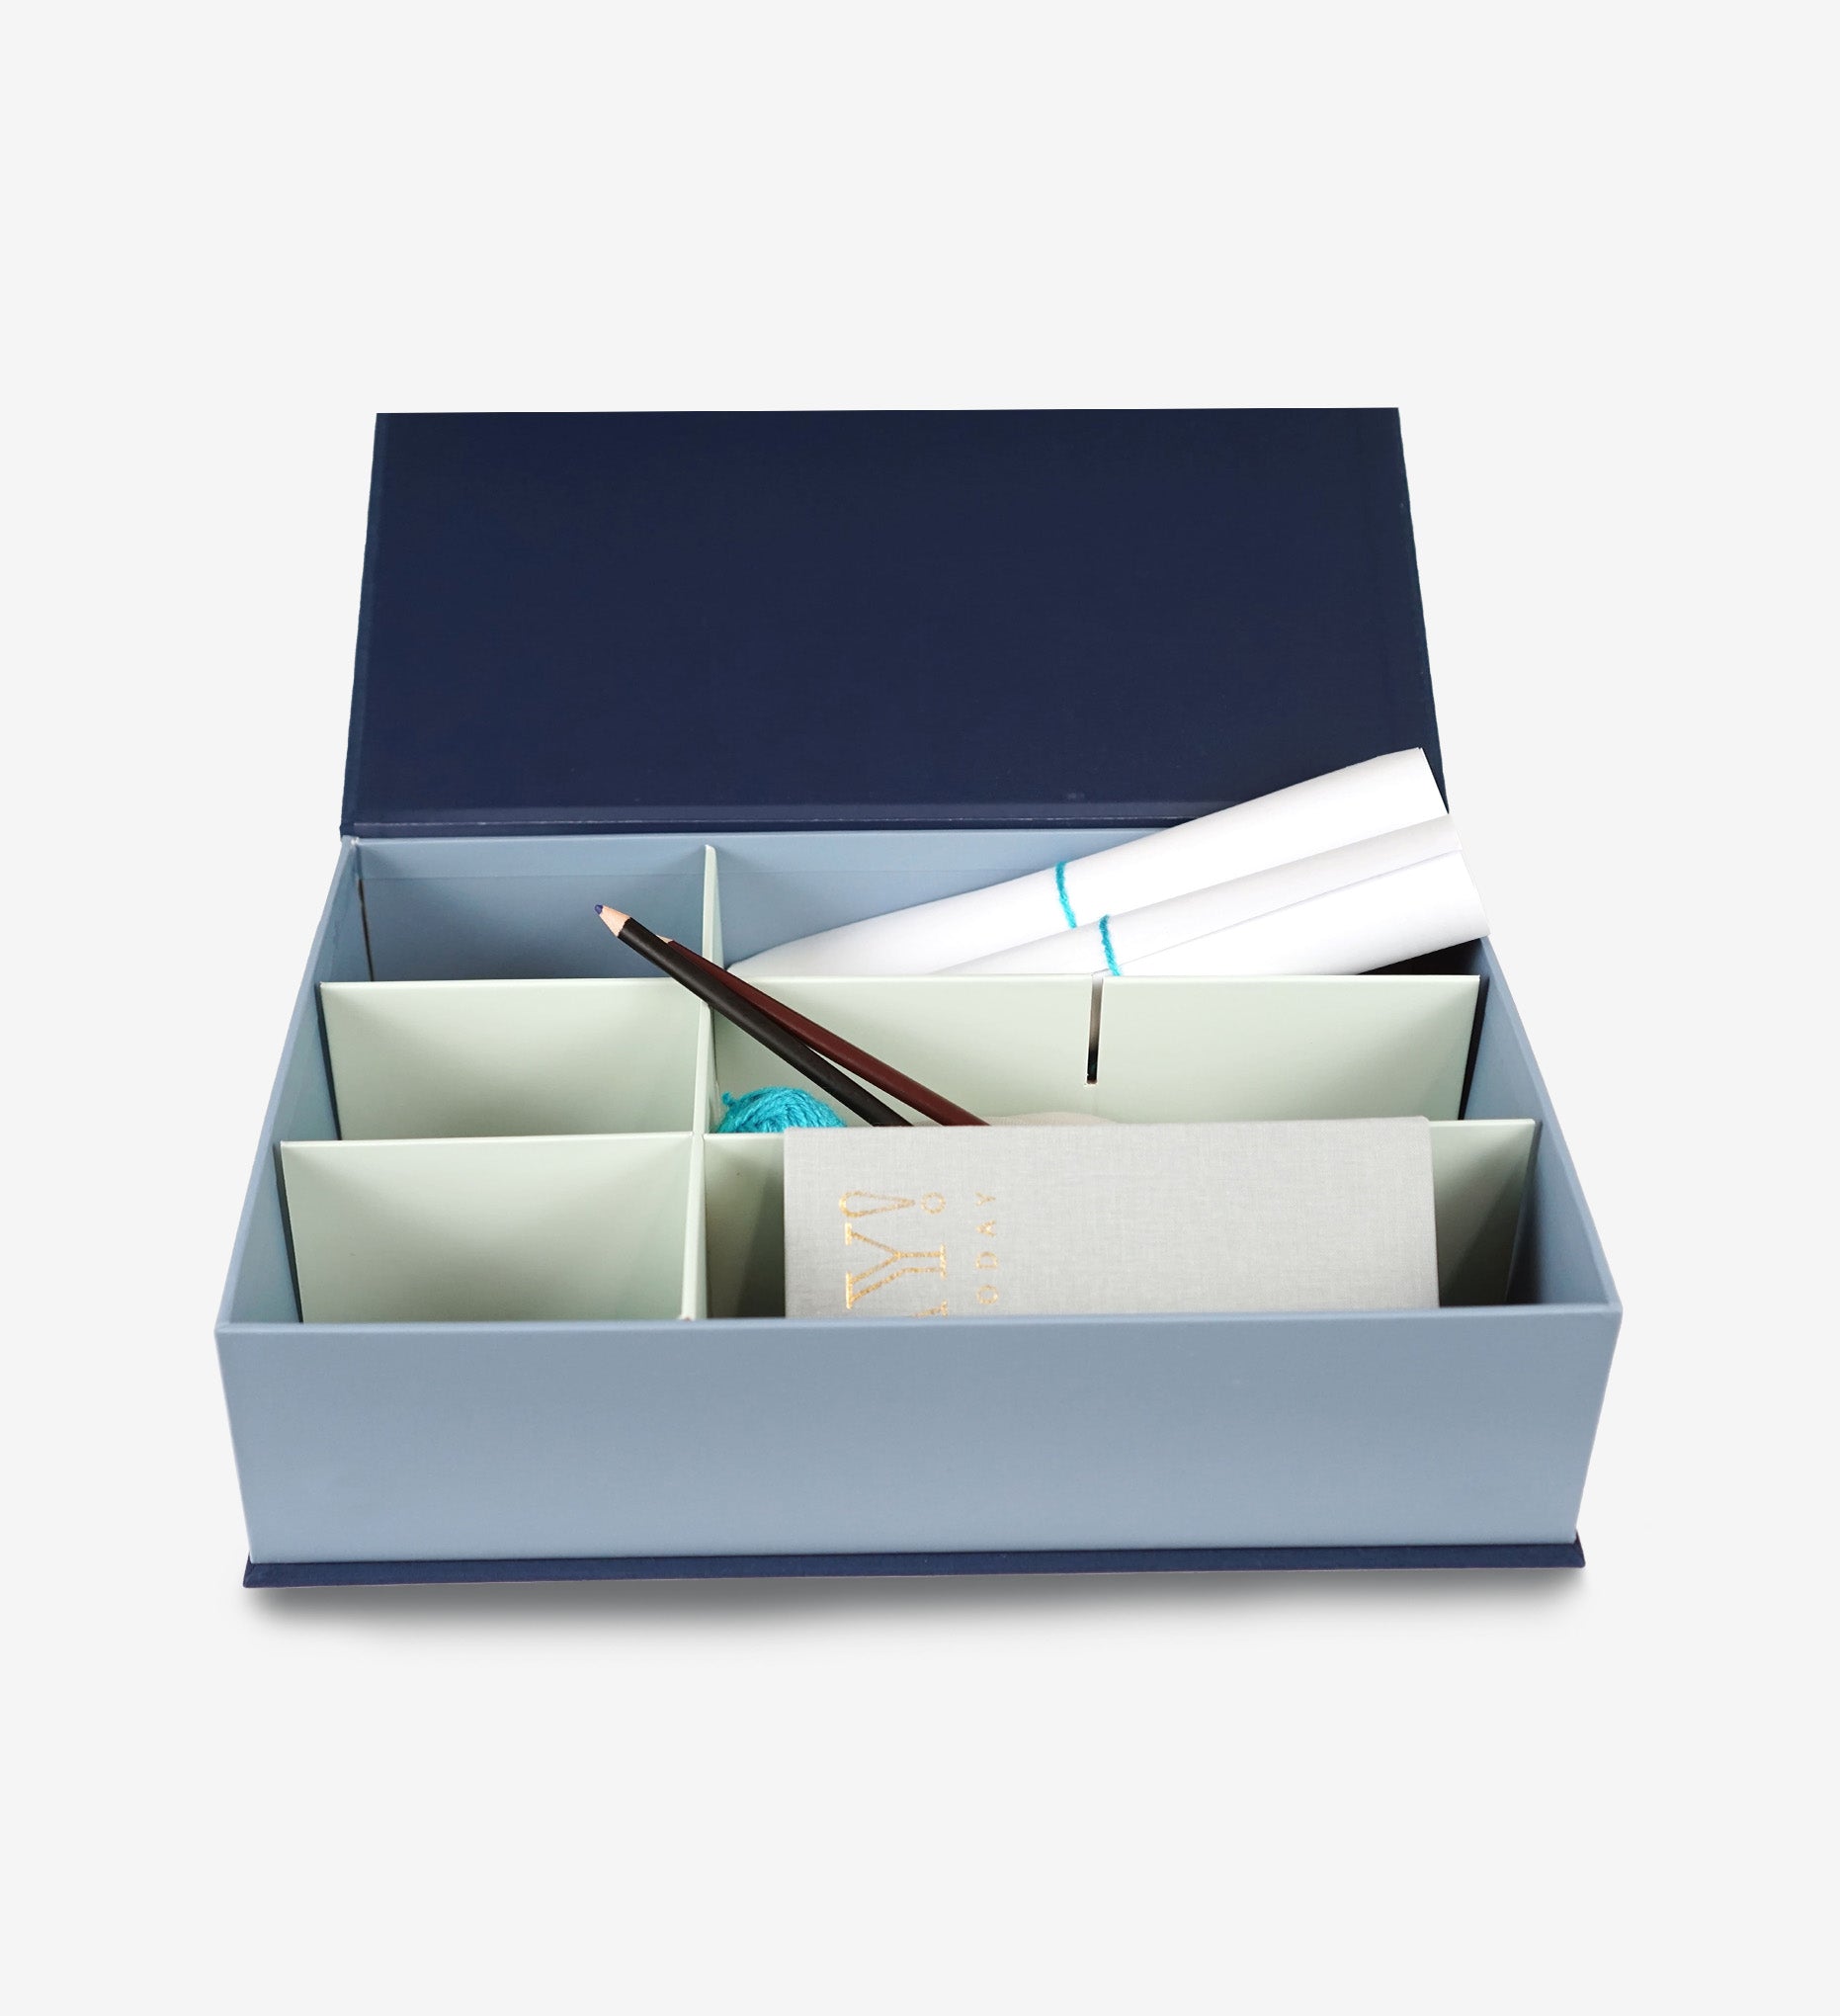 Savor Overflow box with a pencil and paper inside